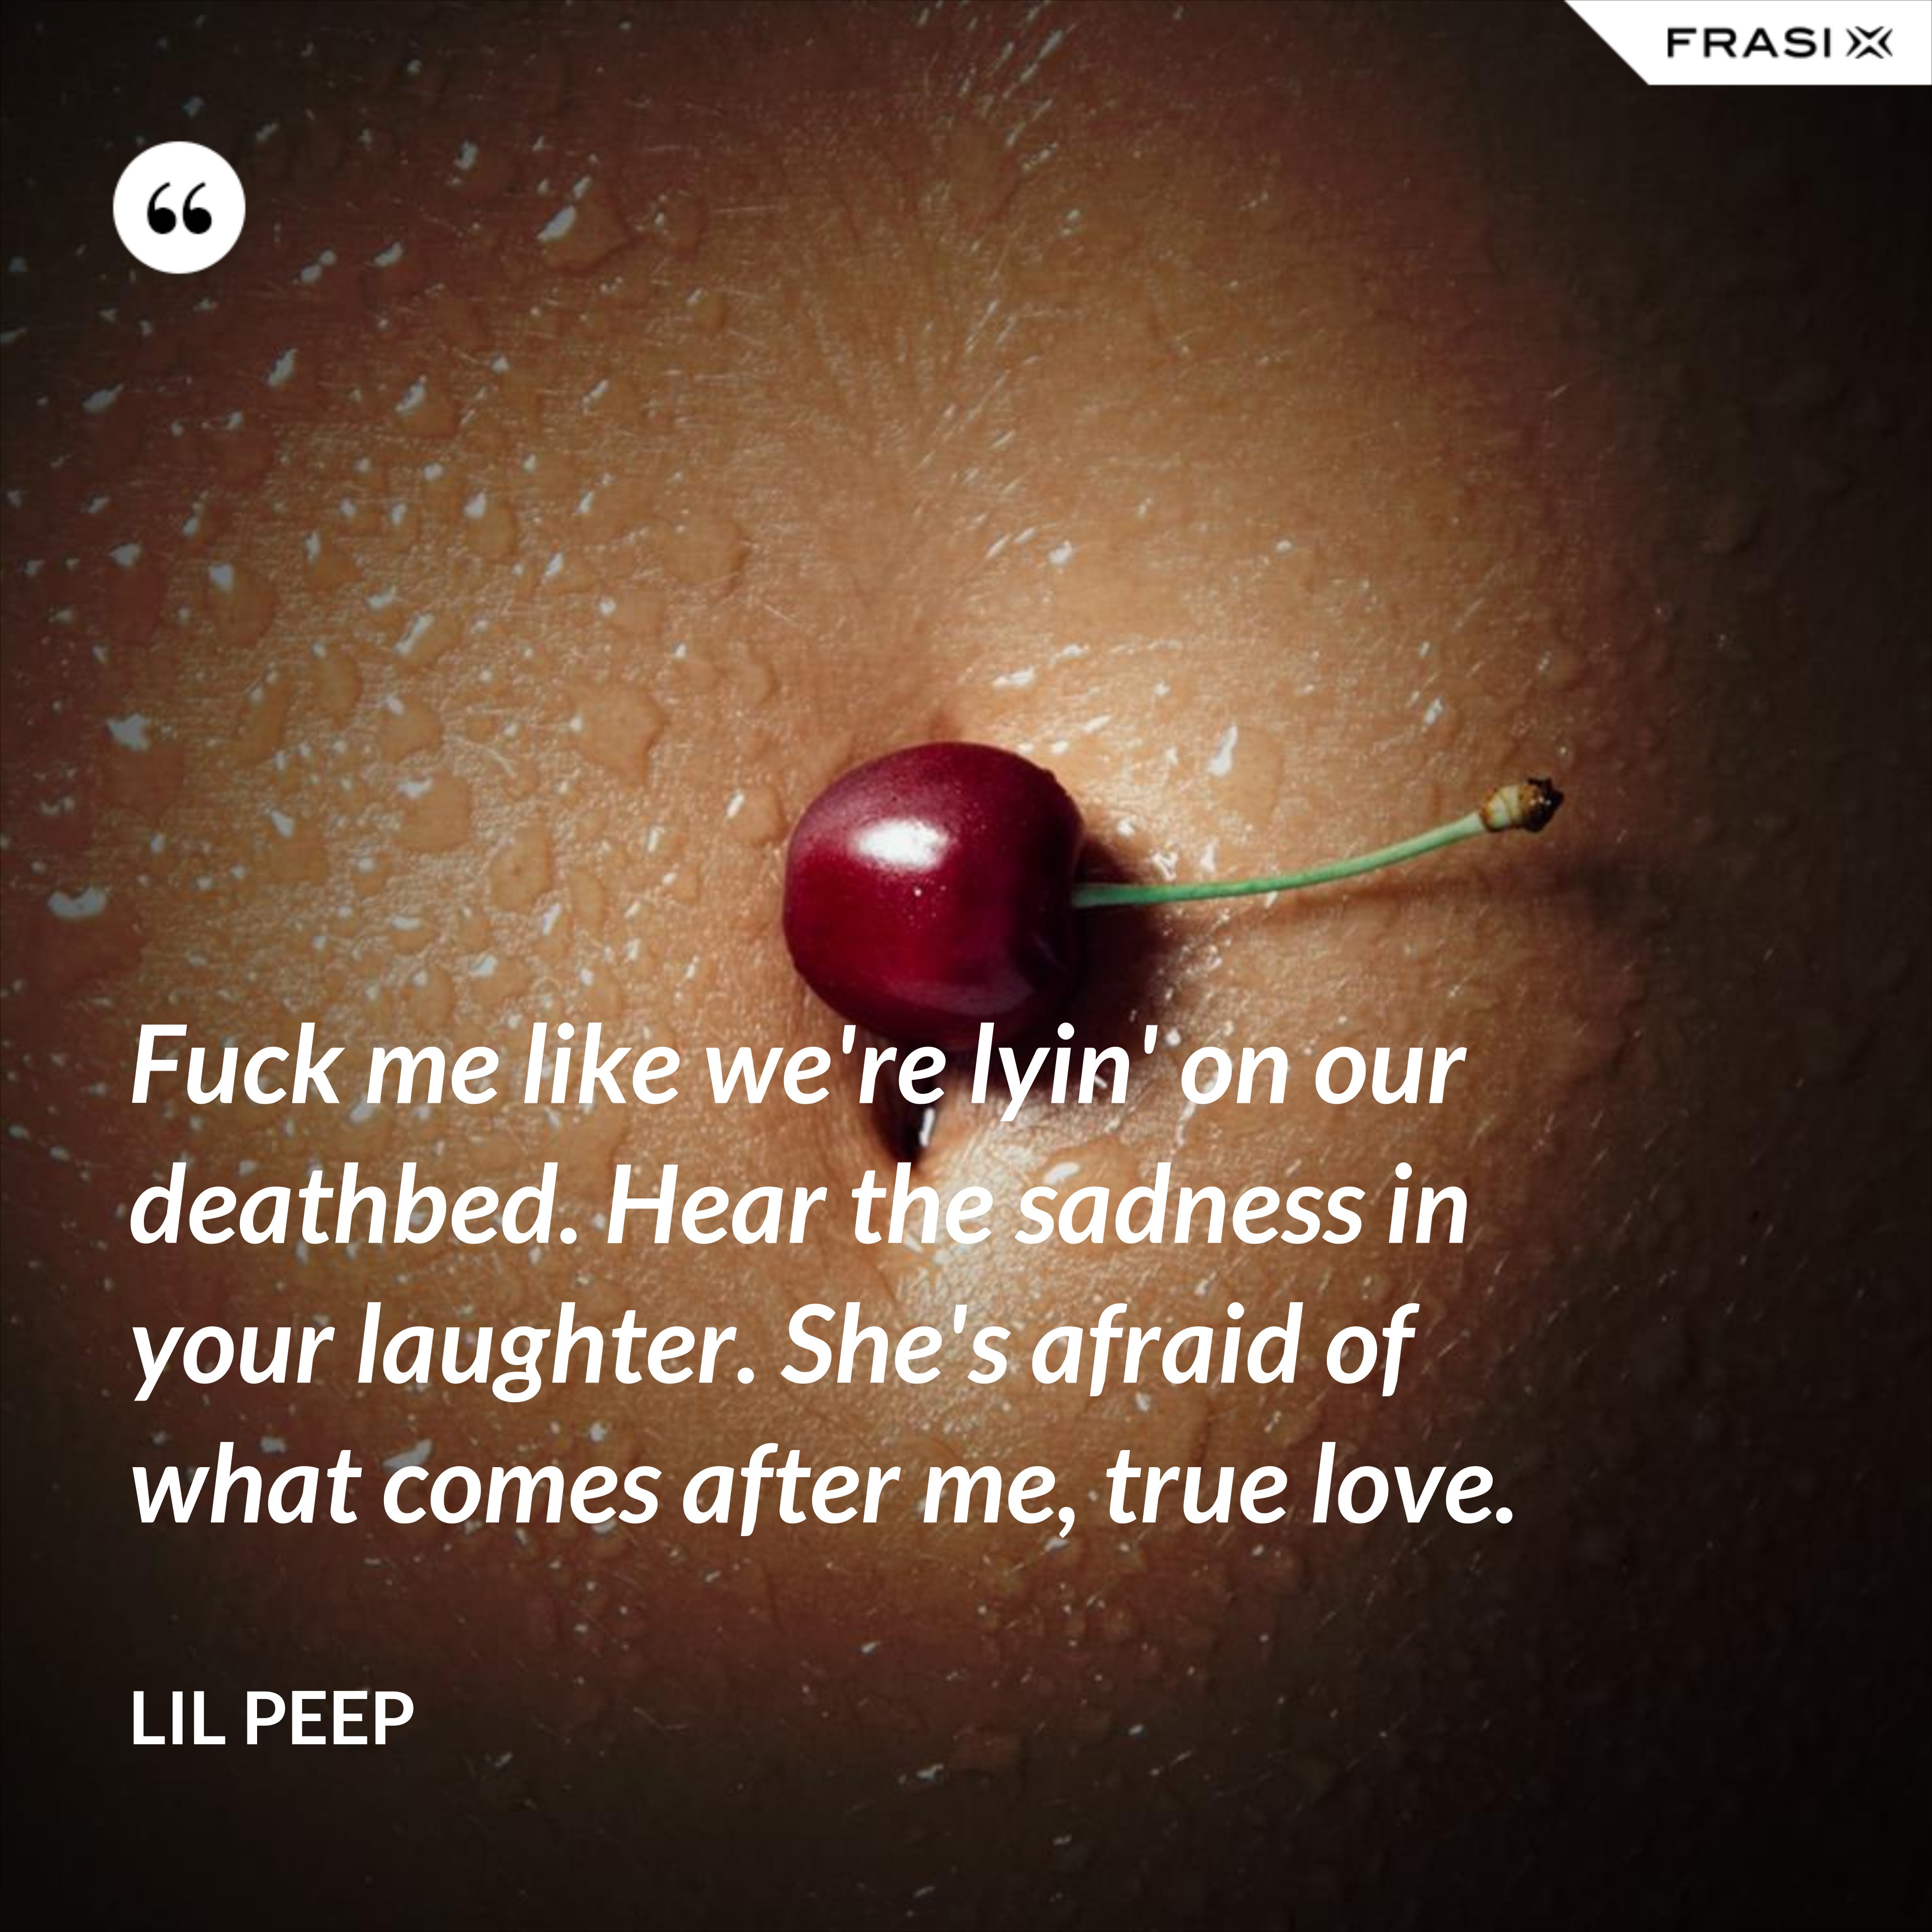 Fuck me like we're lyin' on our deathbed. Hear the sadness in your laughter. She's afraid of what comes after me, true love. - Lil Peep